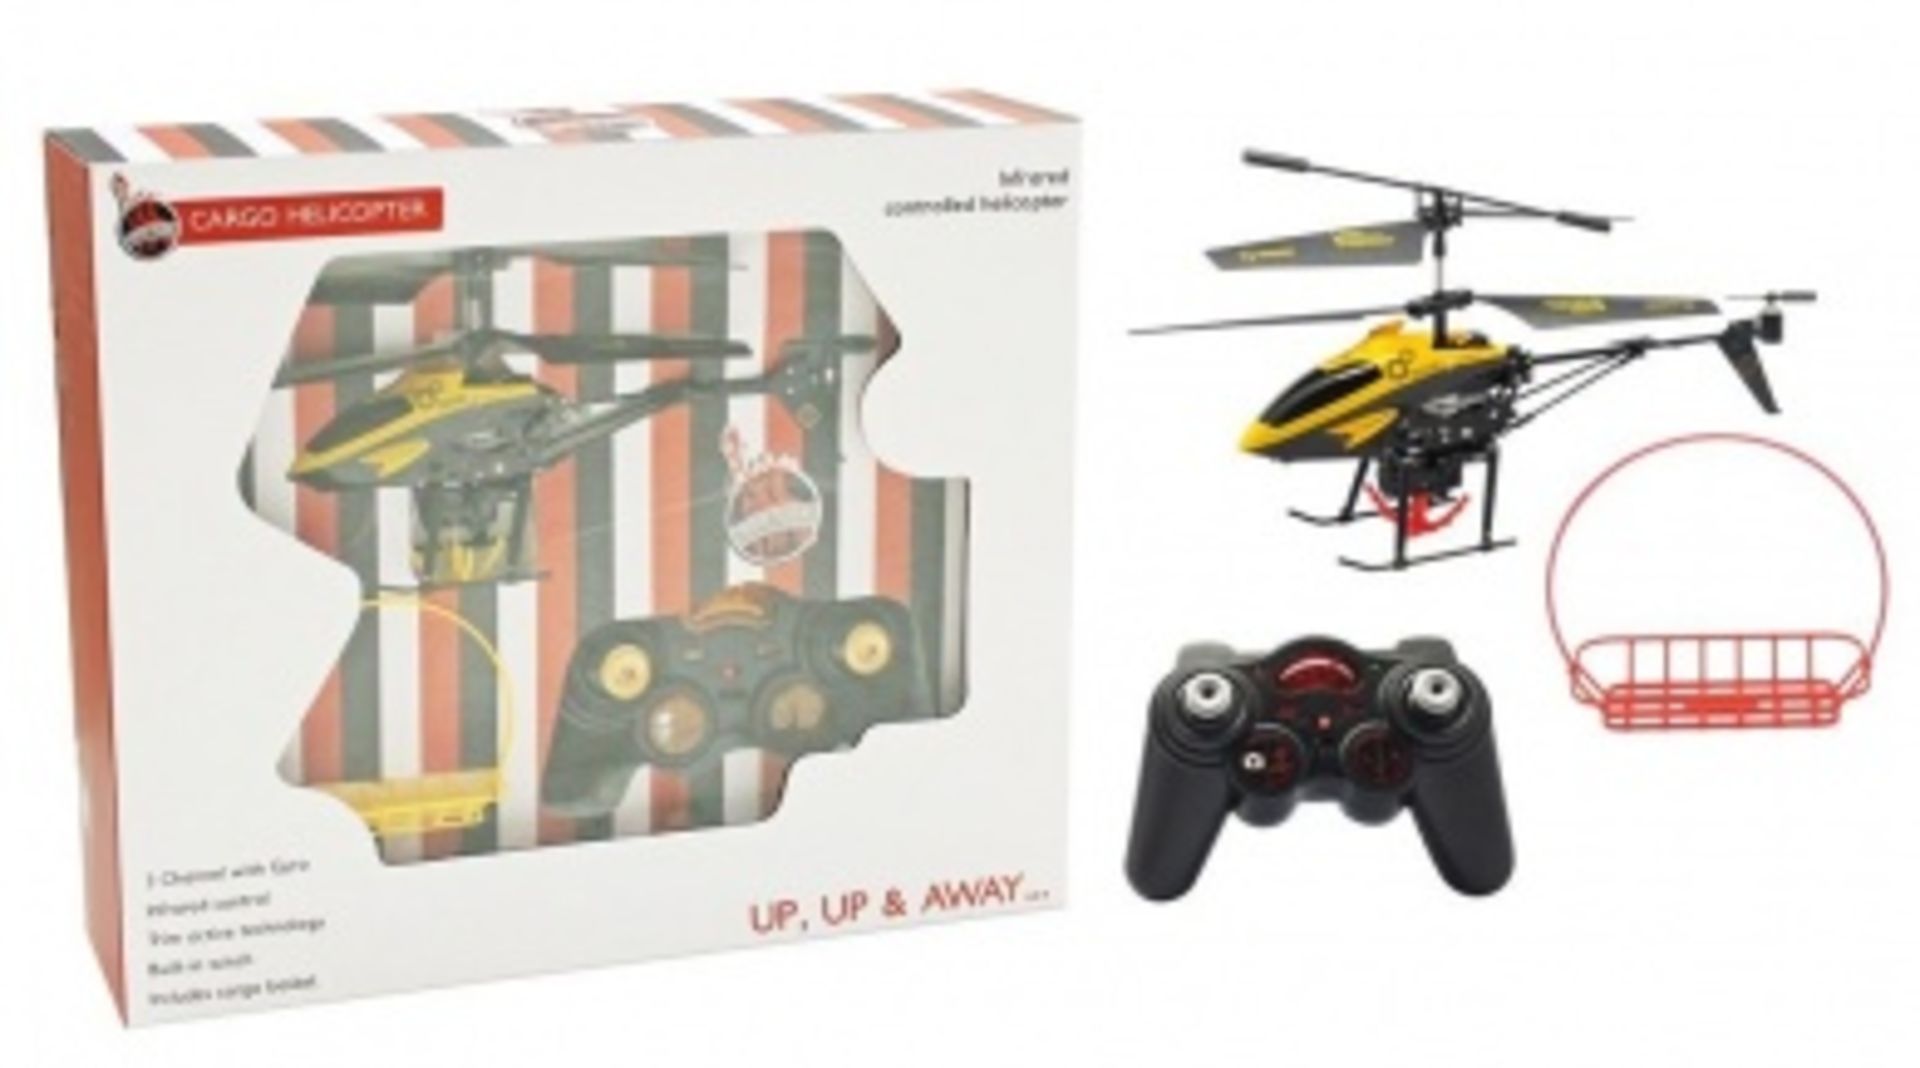 V Infrared controlled Cargo Helicopter RRP £79.99 With 3-channel gyro and trim active technology.